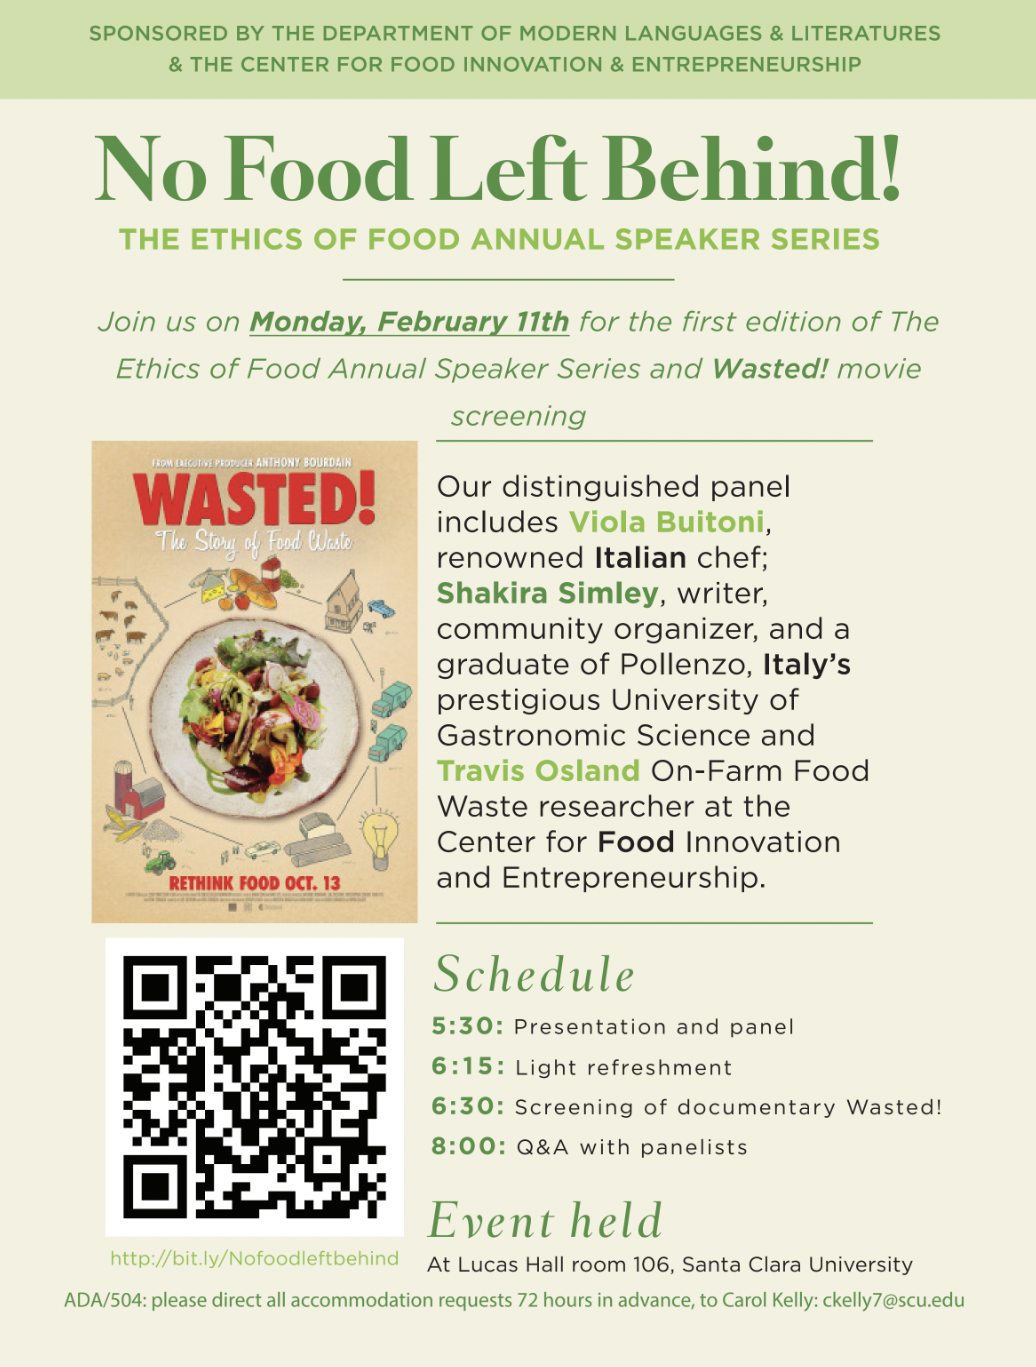 Wasted screening flyer image link to story